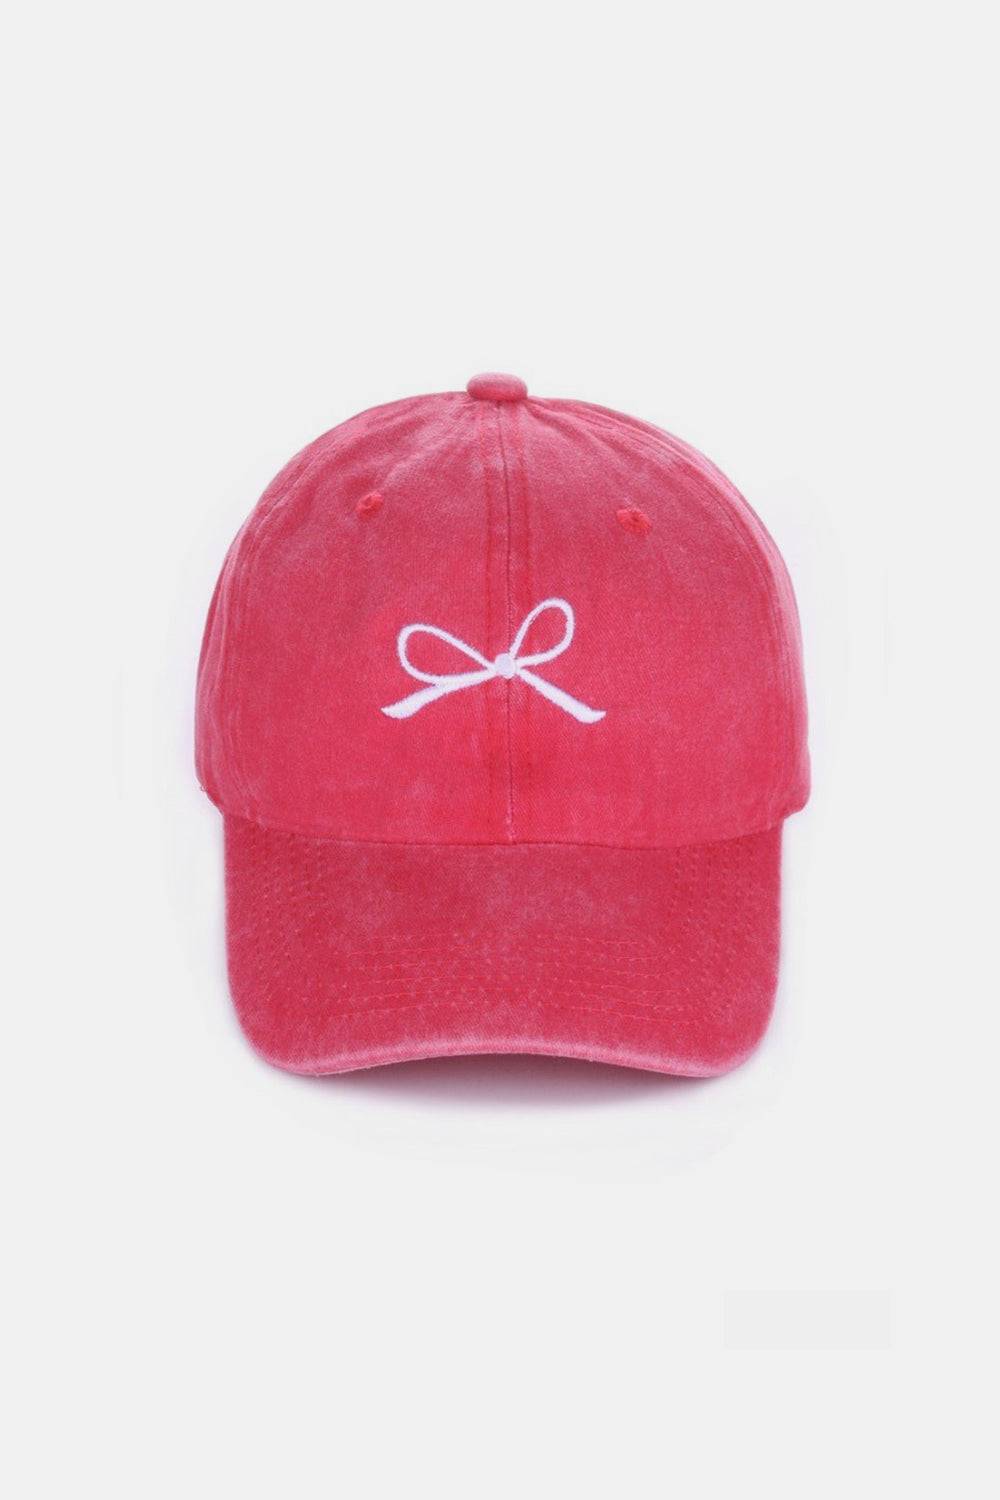 a red hat with a white bow on it